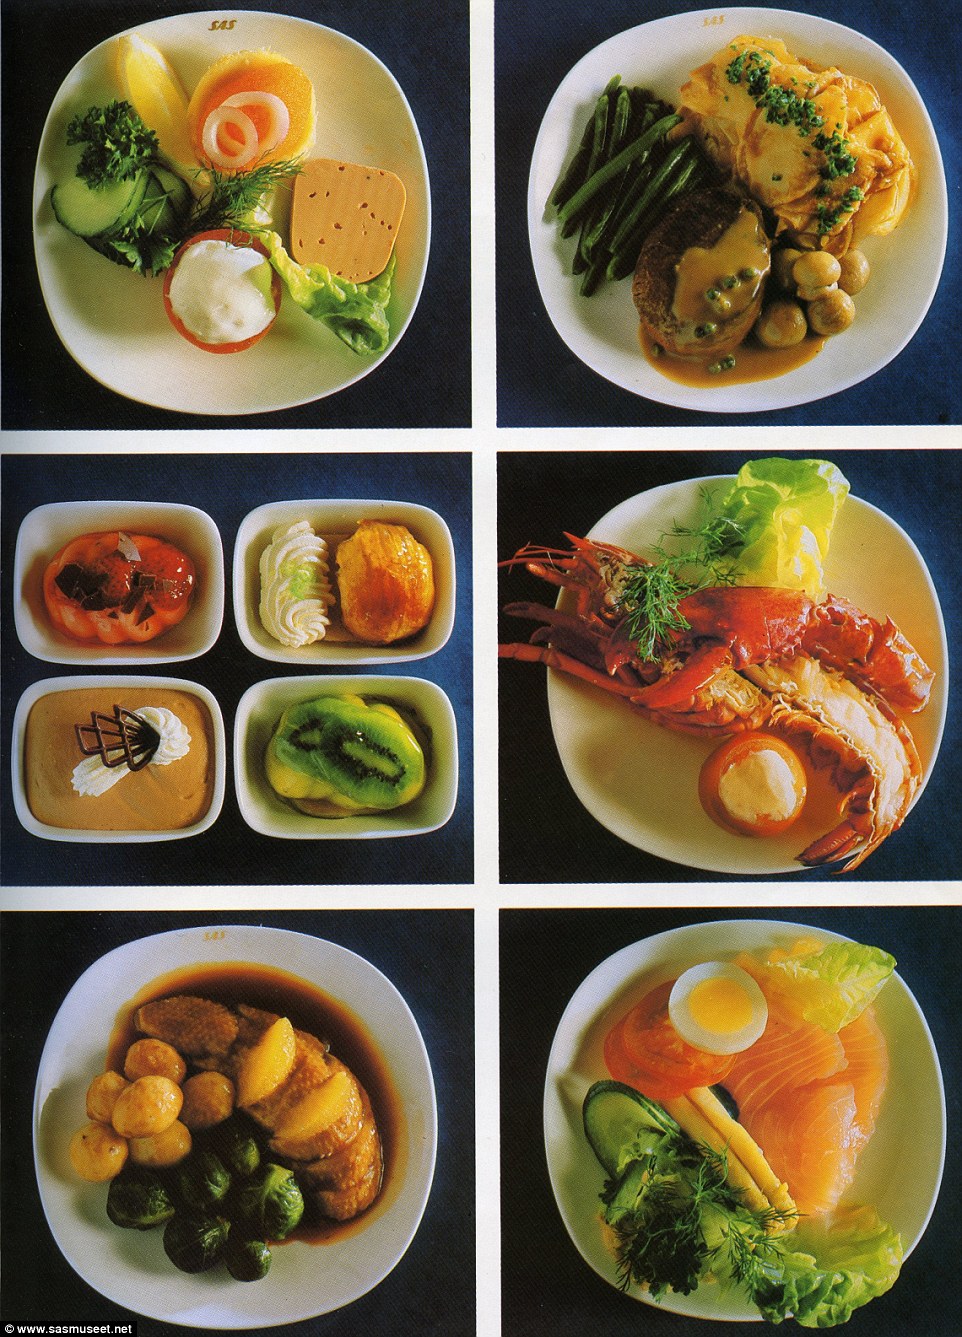 Lobster was frequently featured on the menu of Scandinavian Airlines. These photos, taken in 1981, shows what you might have eaten when you flew business class